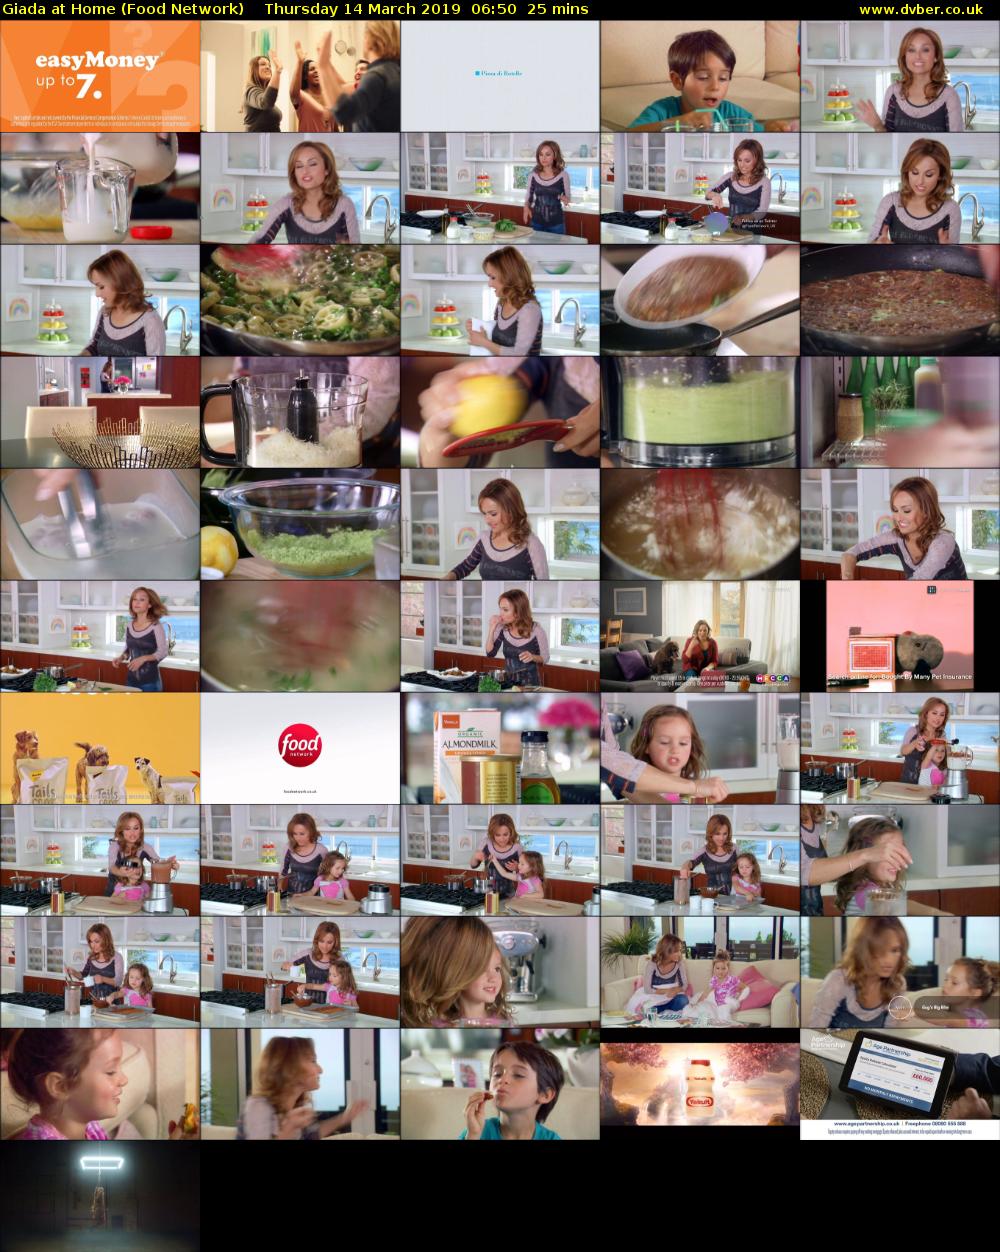 Giada at Home (Food Network) Thursday 14 March 2019 06:50 - 07:15